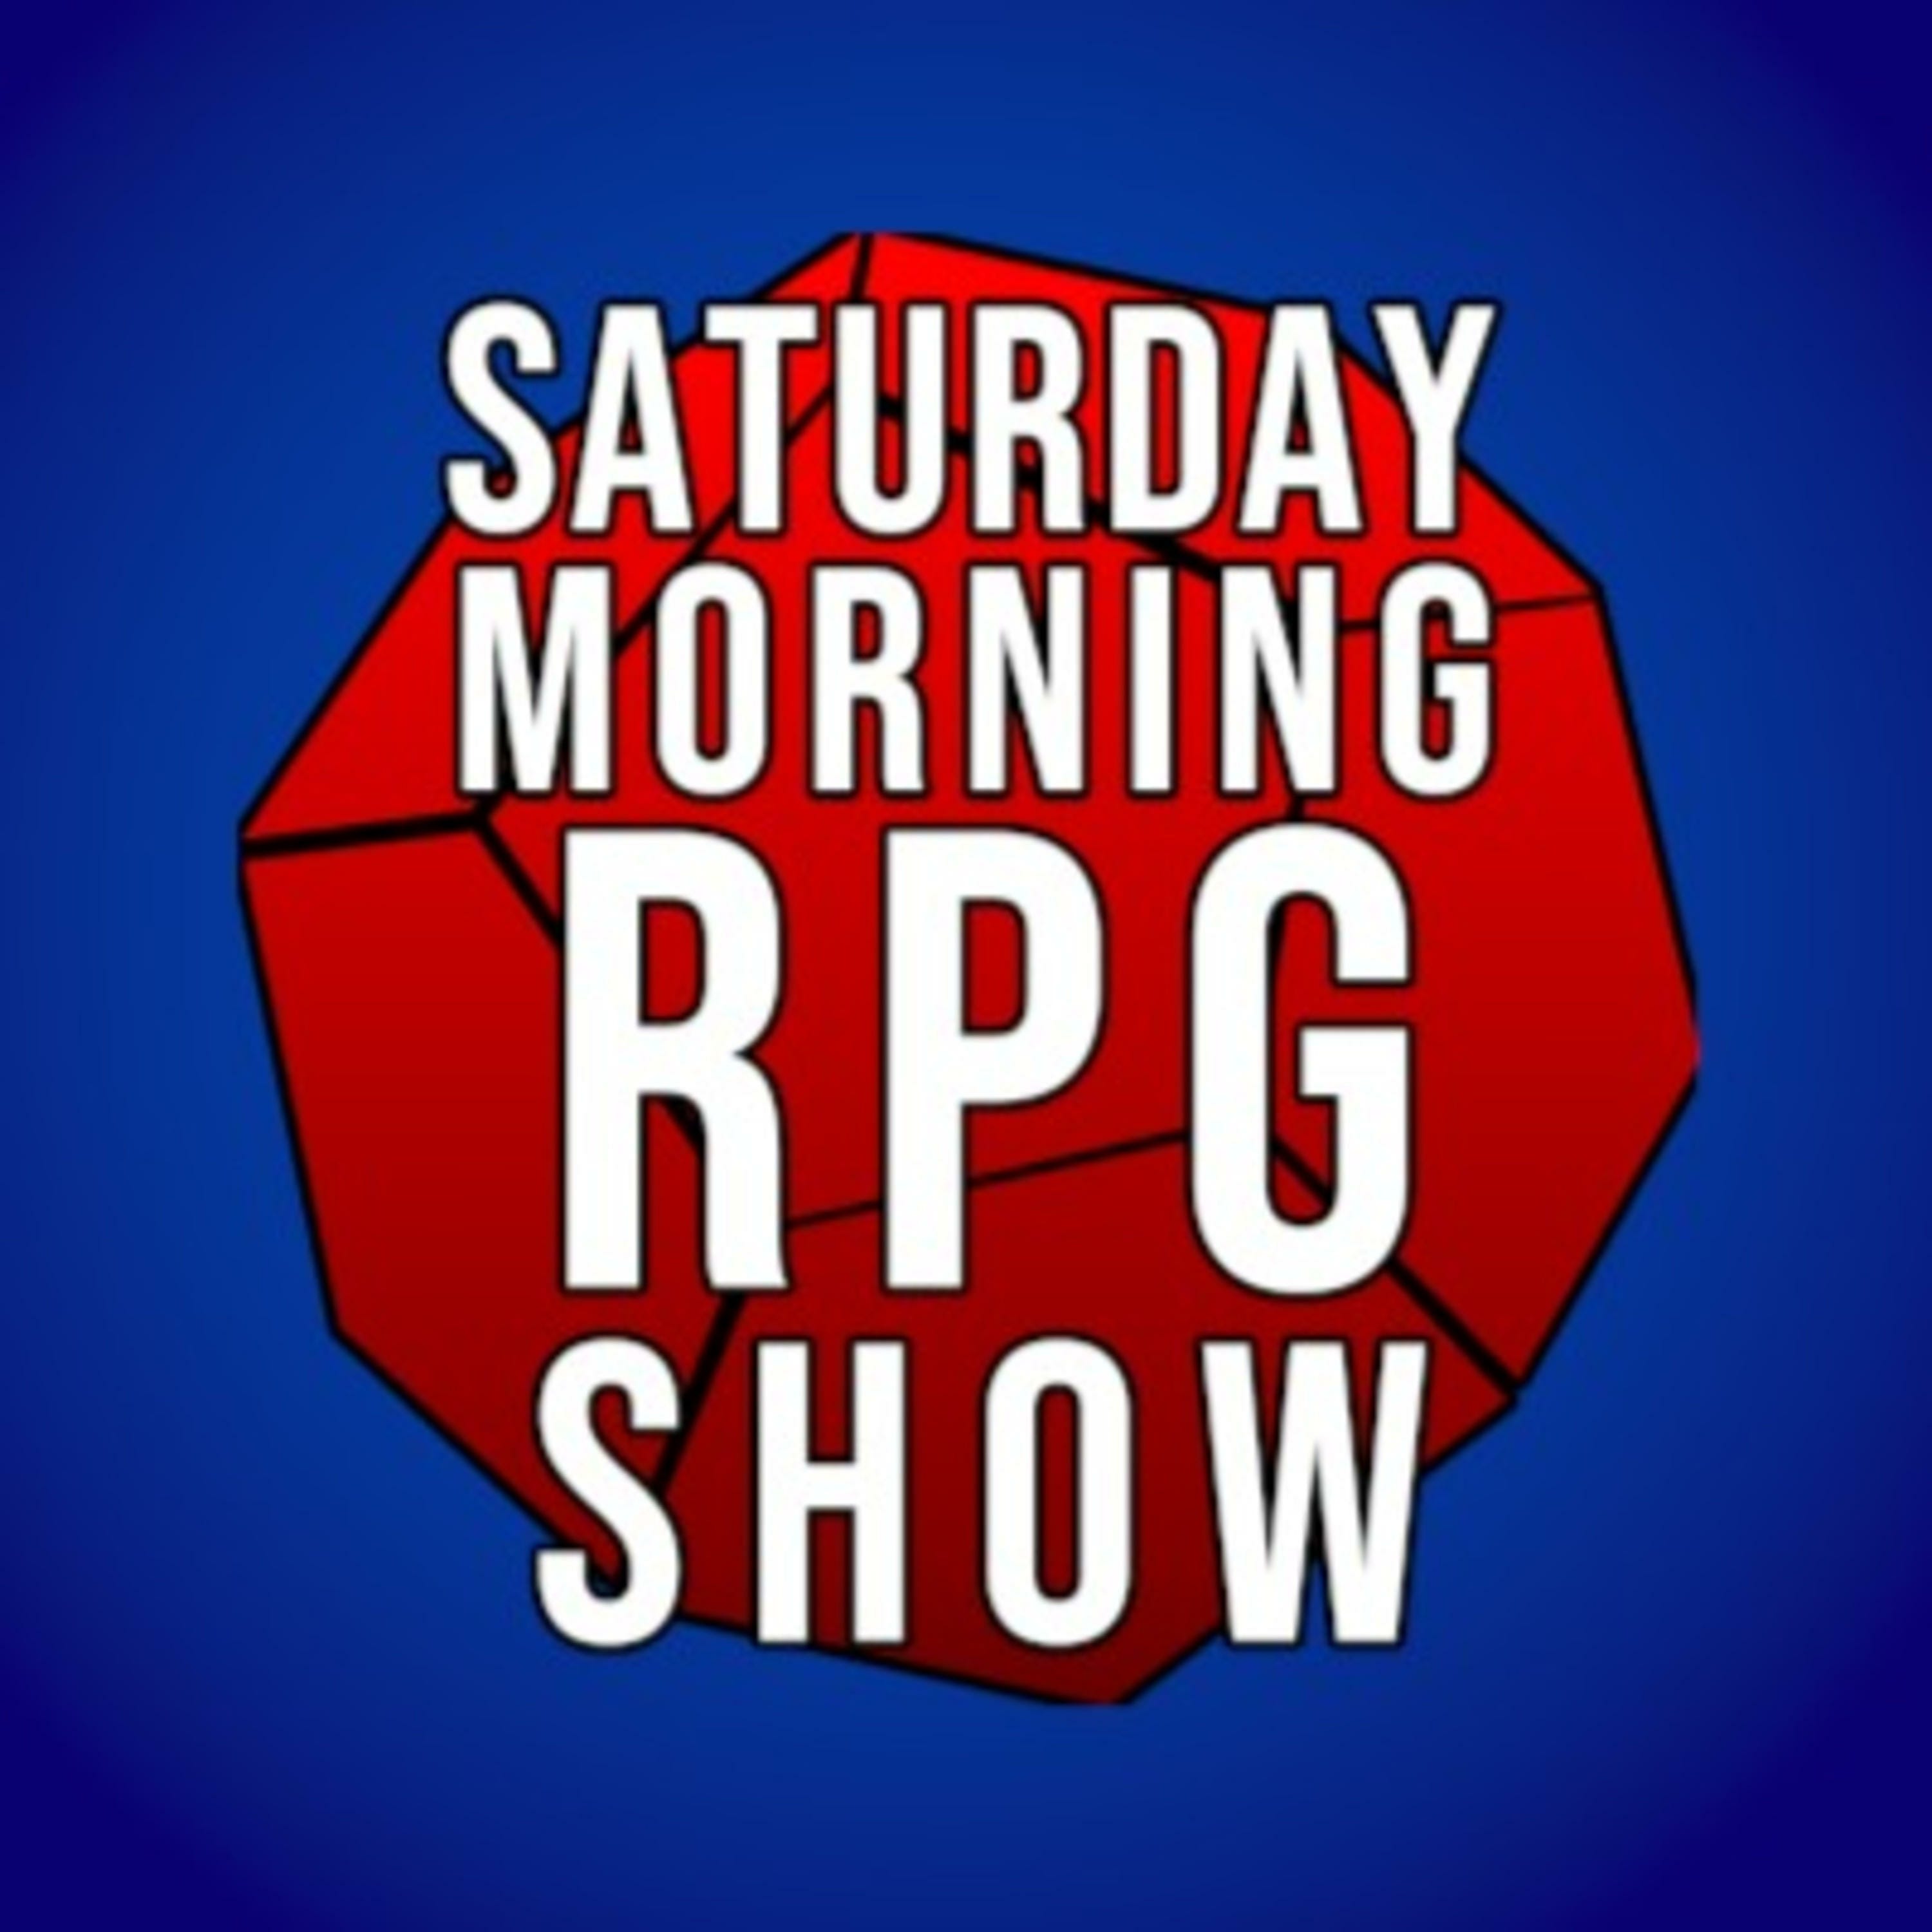 Ep 101 - Where’d all that Unearthed Arcana go!?